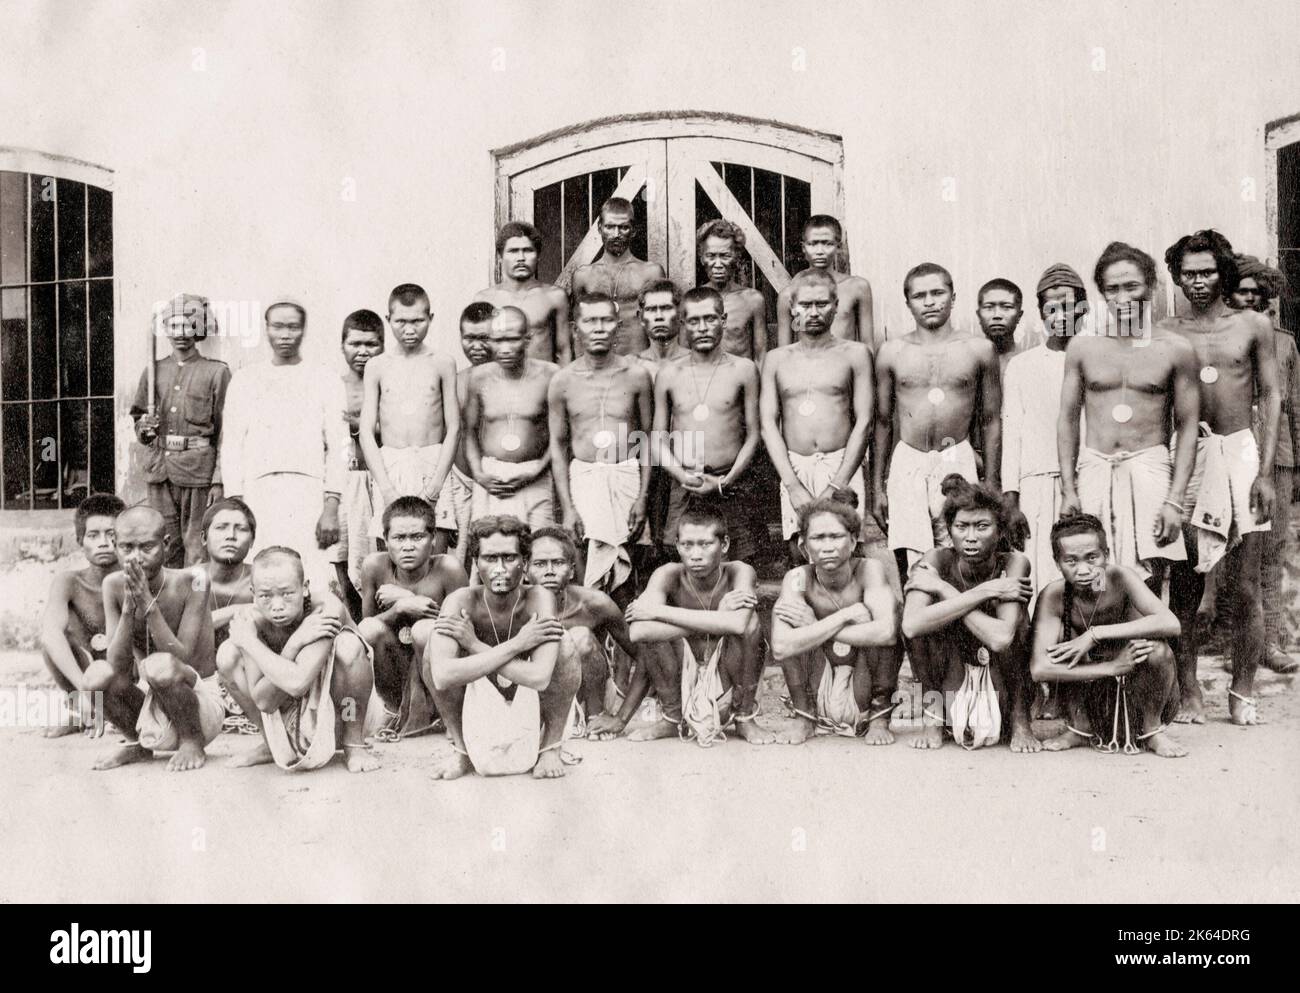 Vintage 19th century photograph: group of prisoners in shackles, irons, India. Stock Photo